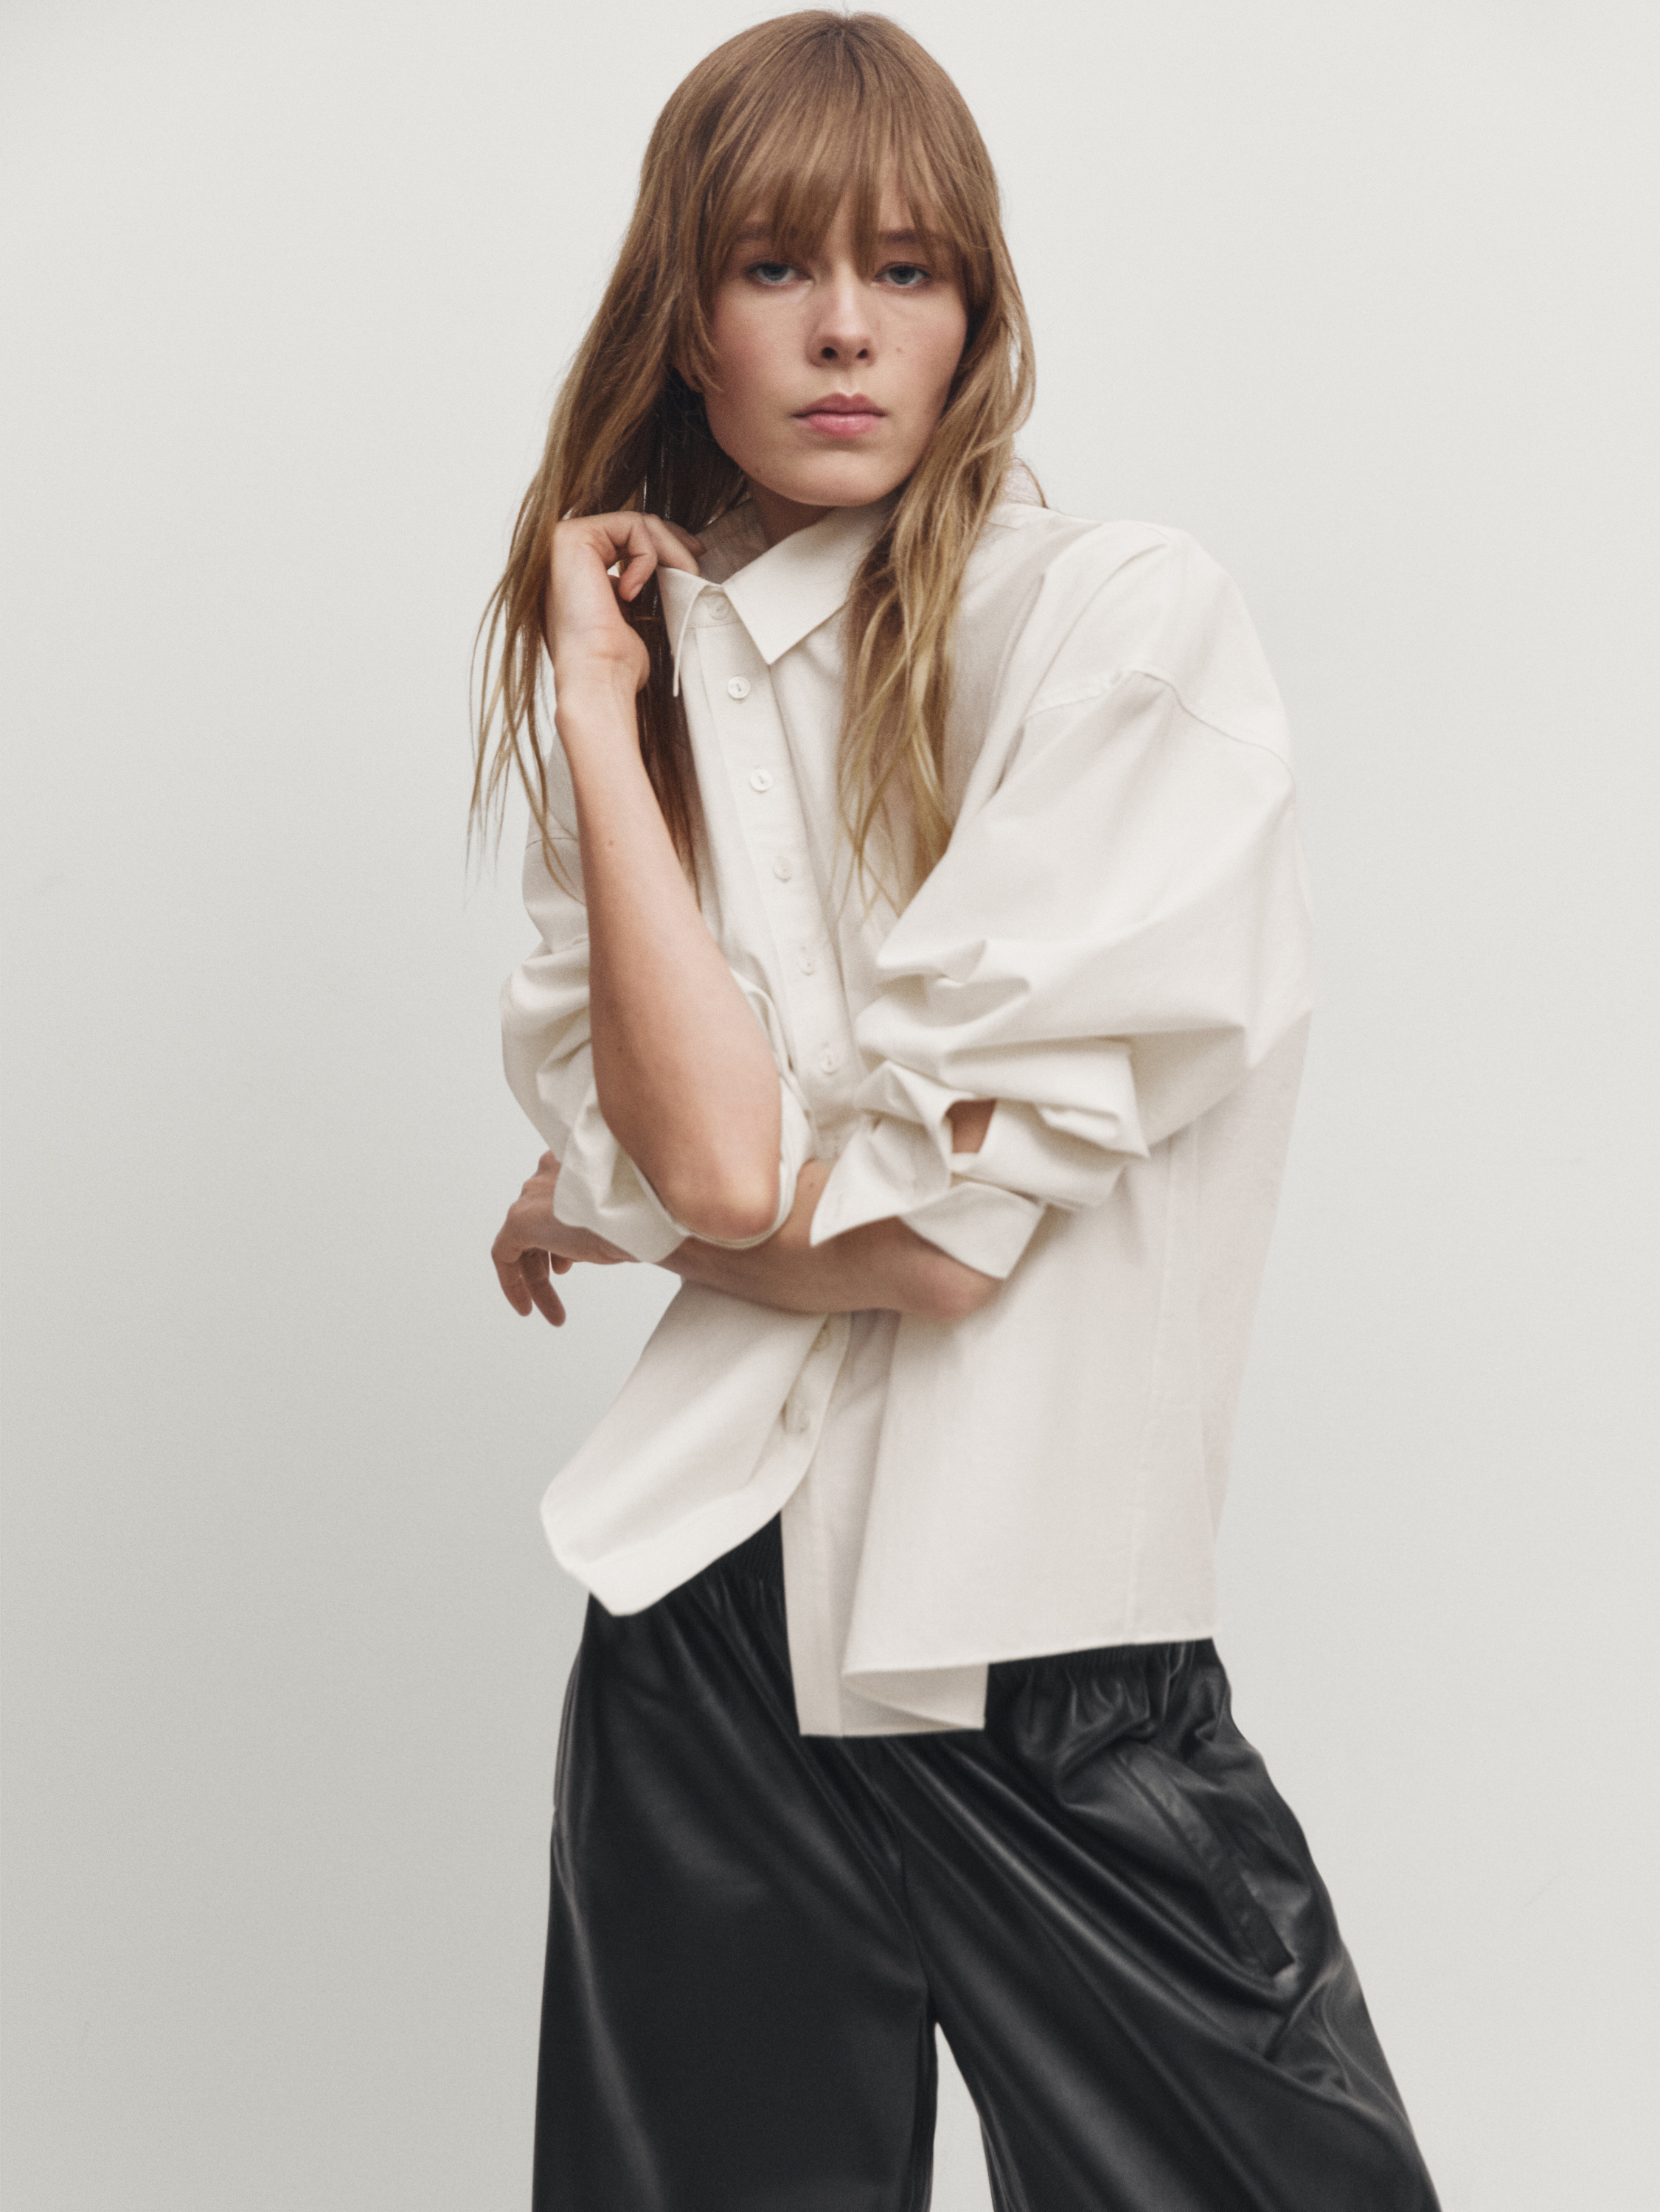 Nappa leather trousers with elasticated waistband